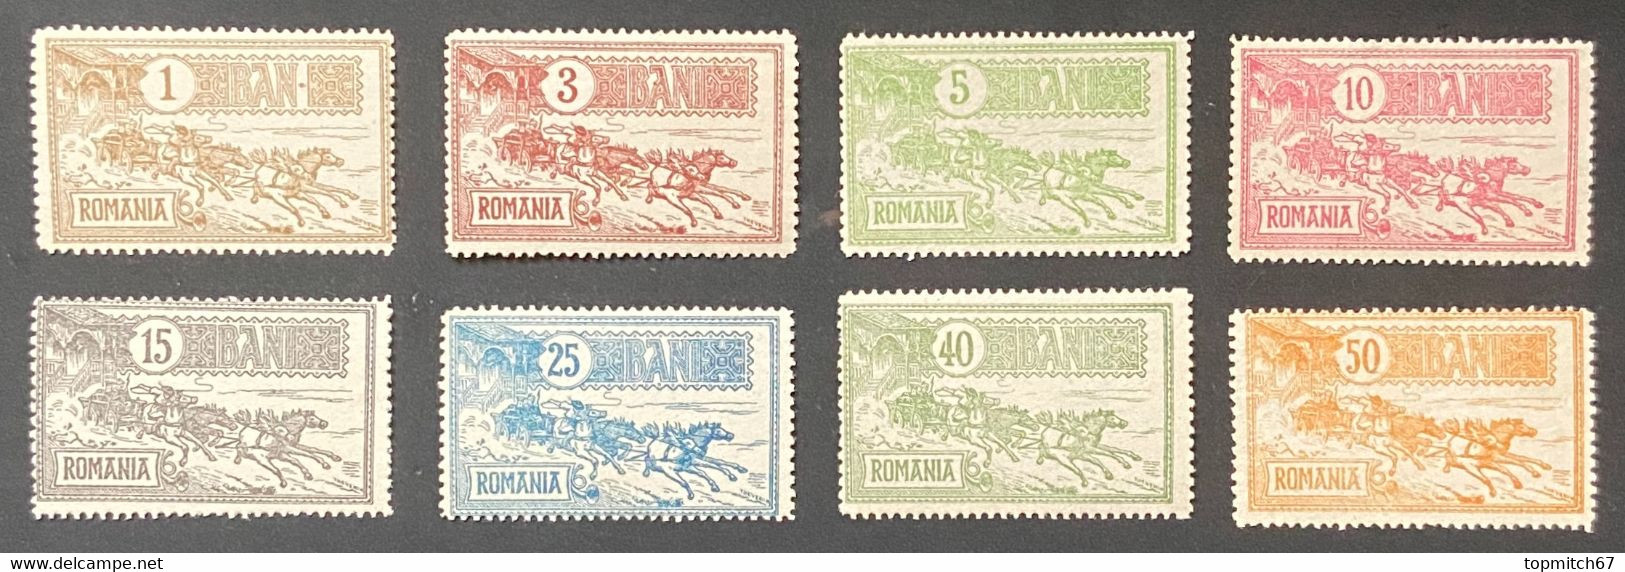 ROM0137-44MNH - Mail Coach - Complete Set Of 8 MNH Stamps - Romania - 1903 - Neufs